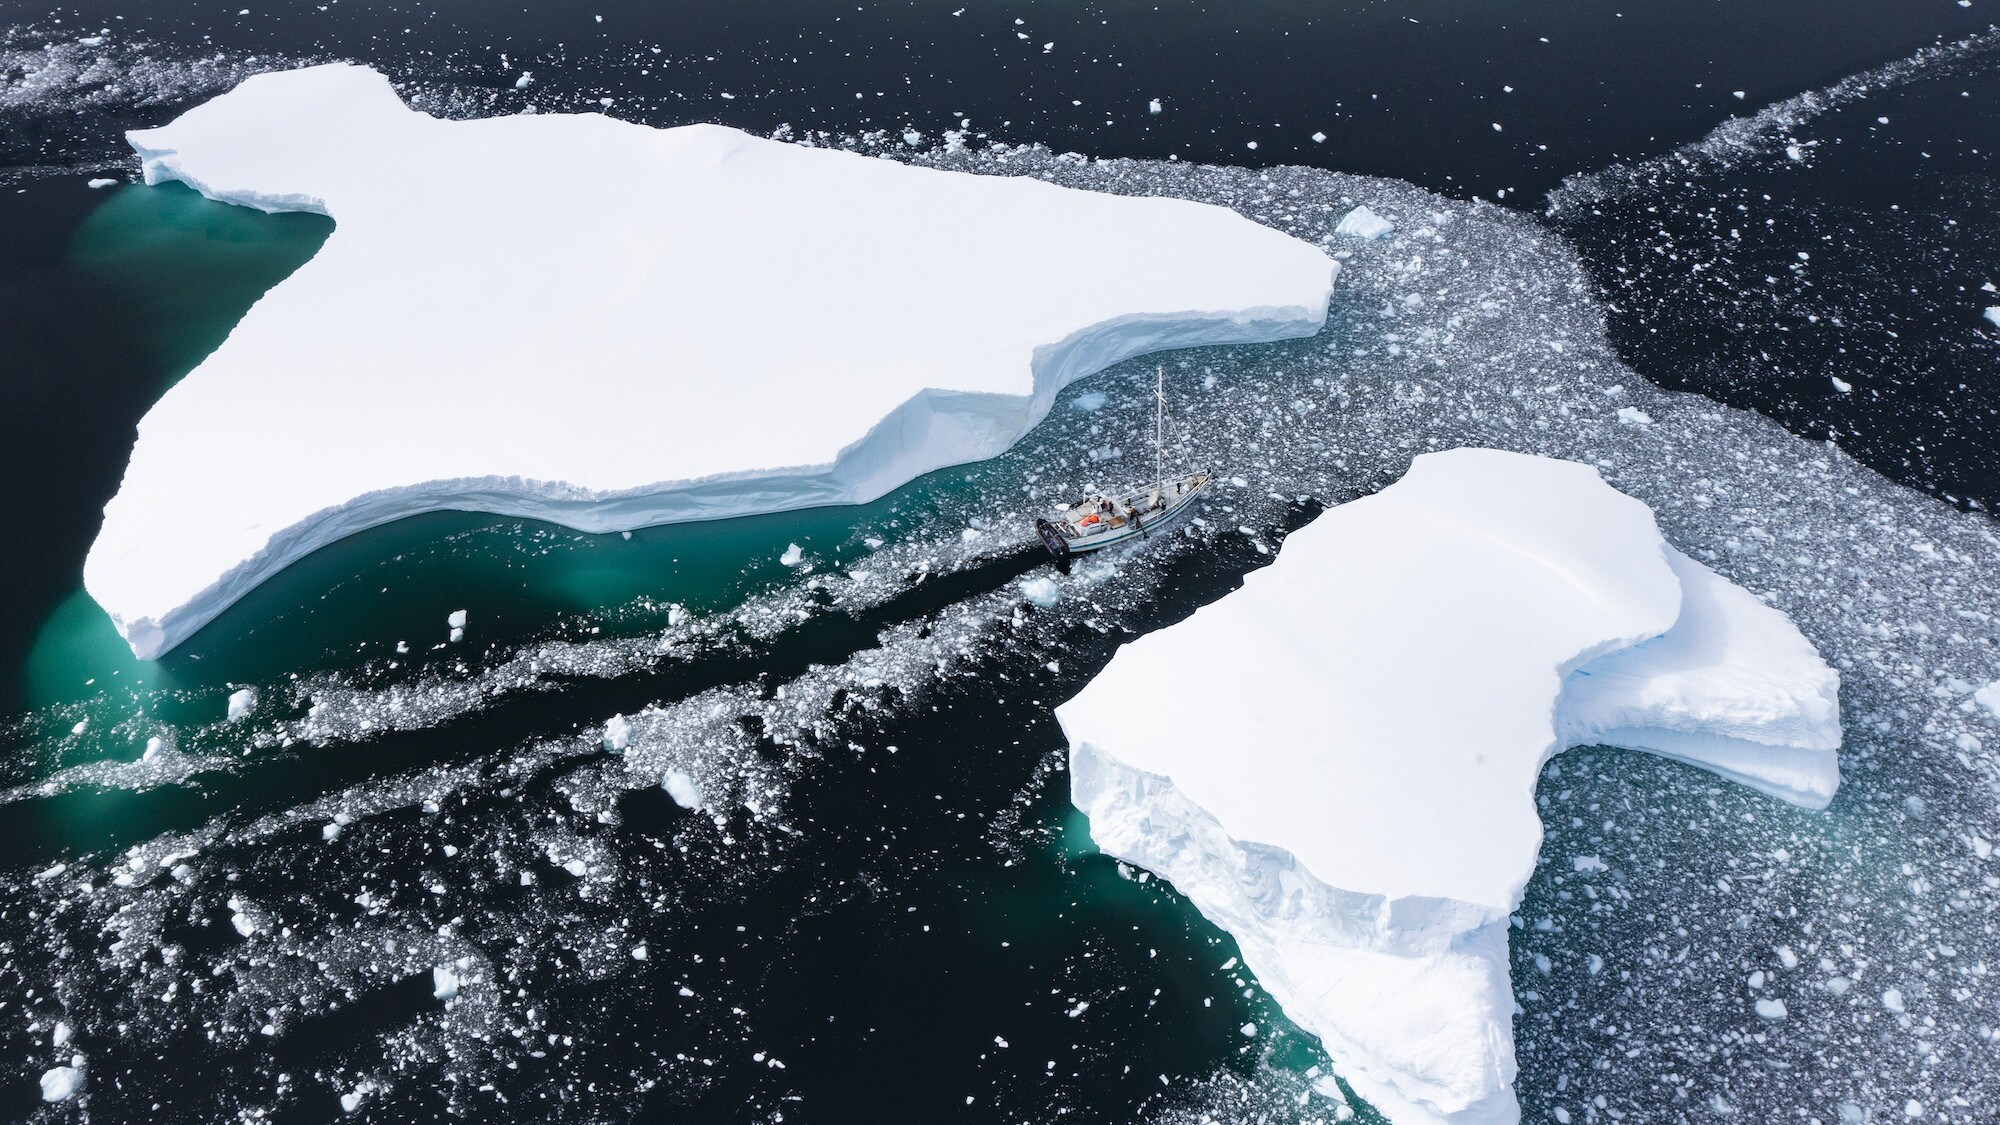 Aerial shot of the Australis sailing between two large ice sheets. (credit: National Geographic for Disney+/Bertie Gregory)